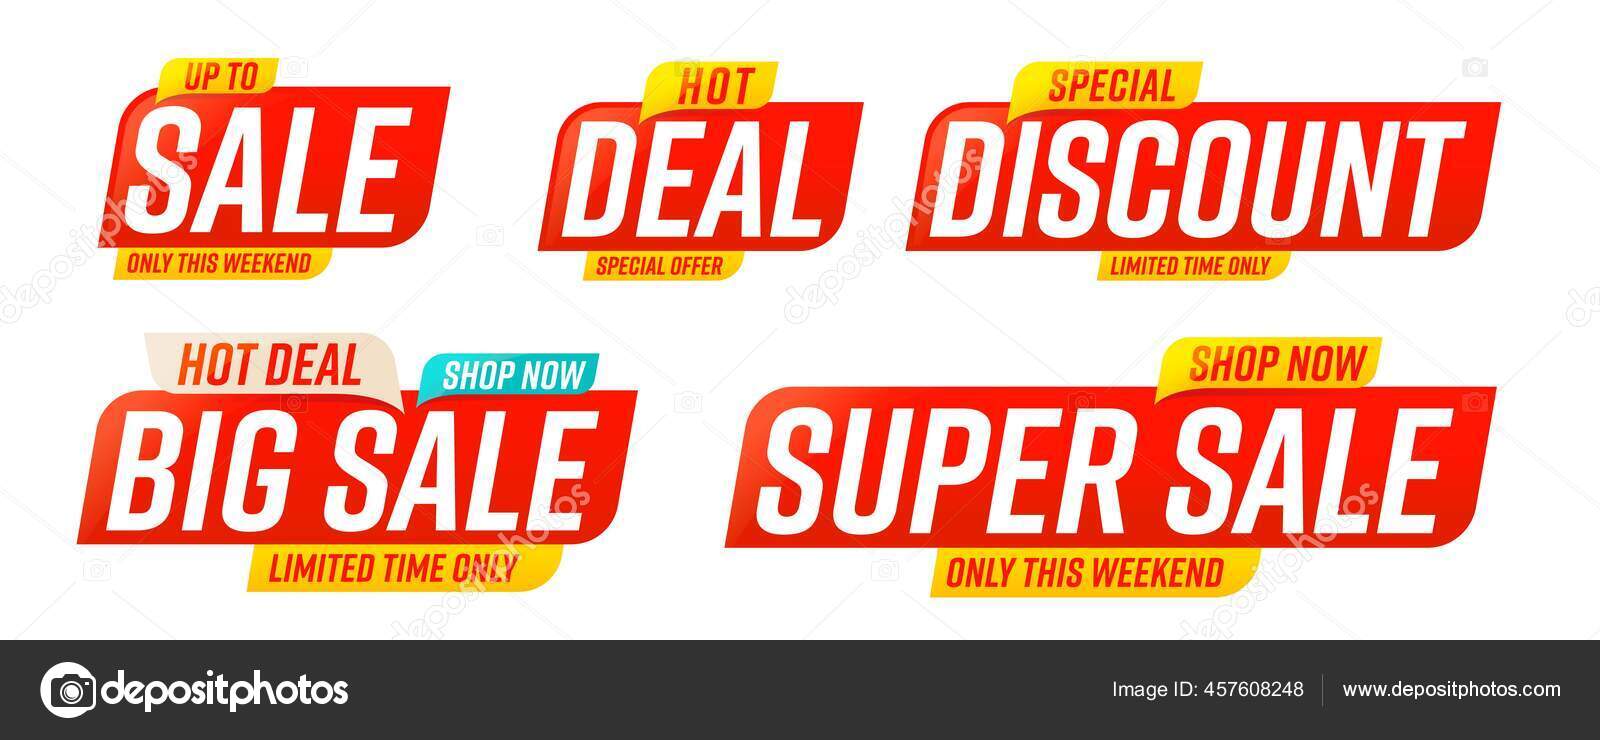 Colorful limited time sale offer discount deal Vector Image